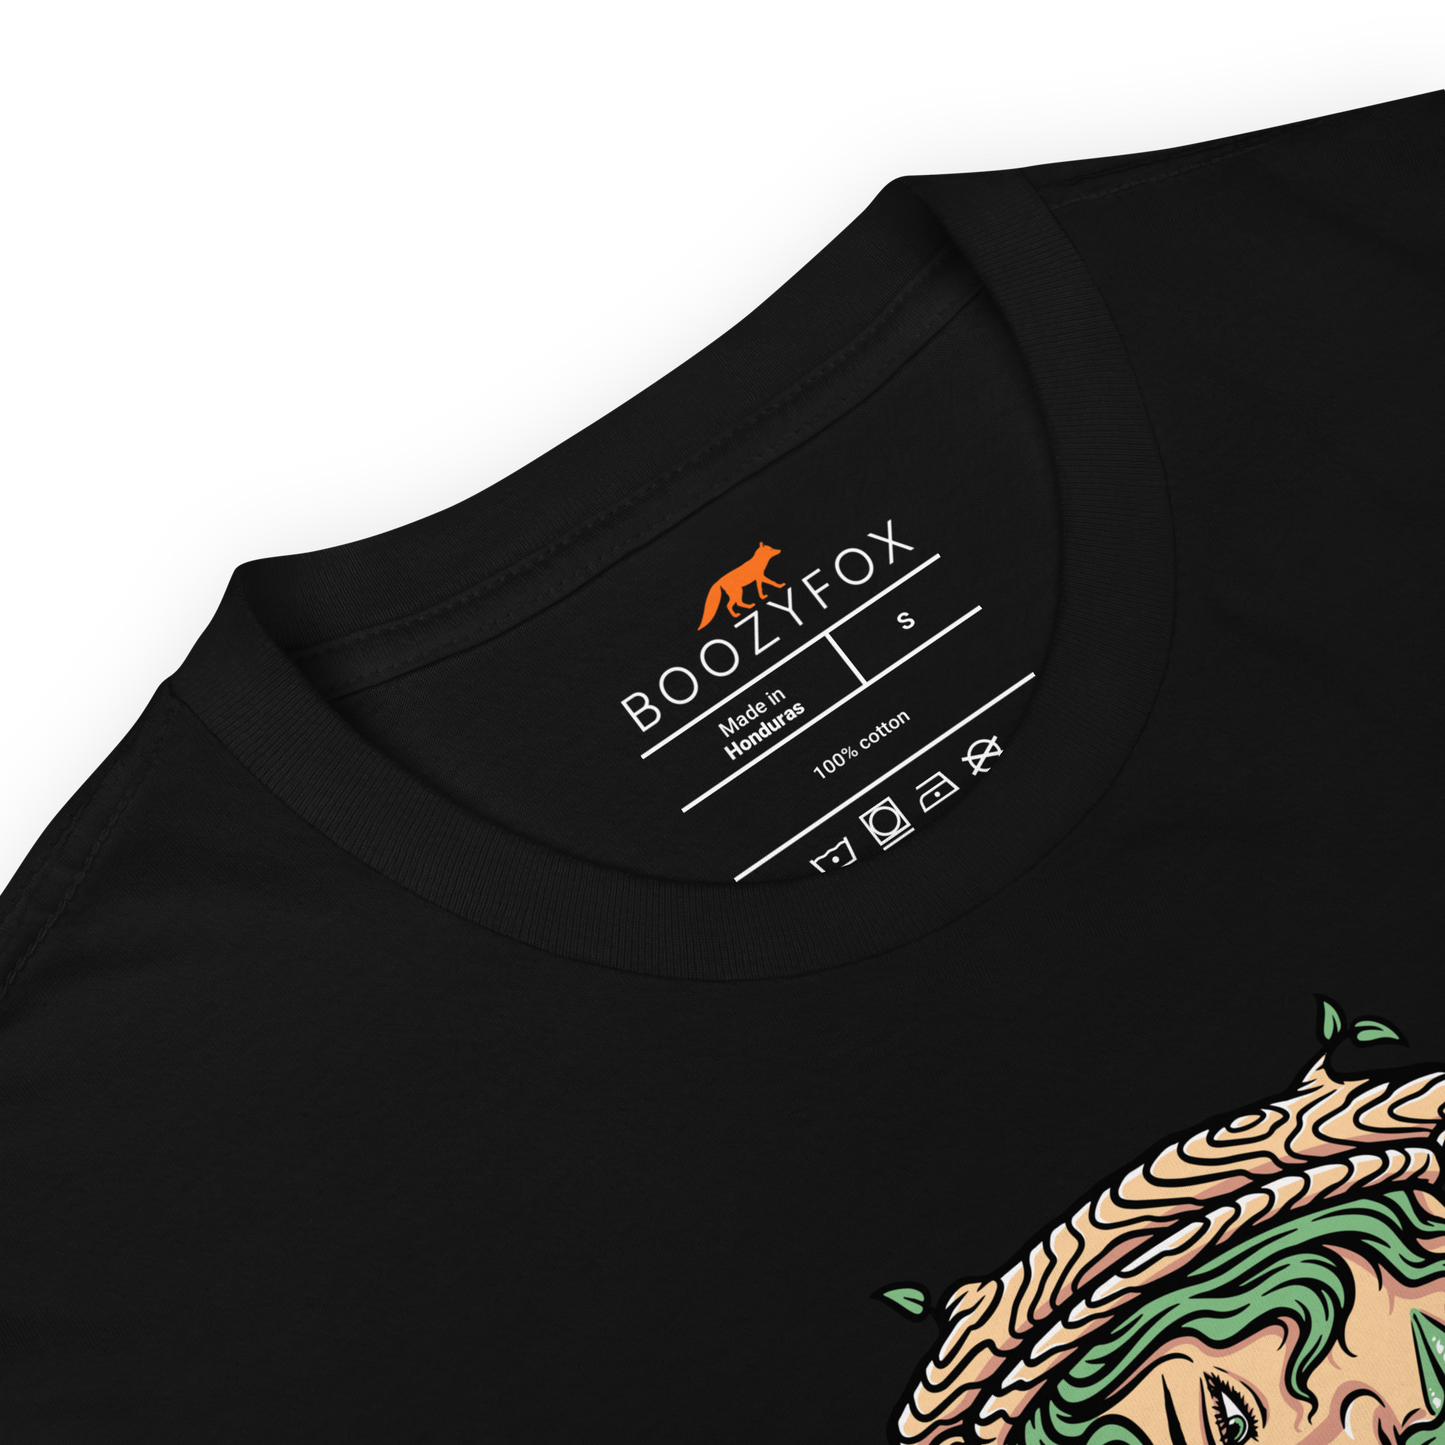 Product details of a Black Hourglass T-Shirt featuring a captivating Time Won't Wait graphic on the chest - Cool Graphic Hourglass T-Shirts - Boozy Fox